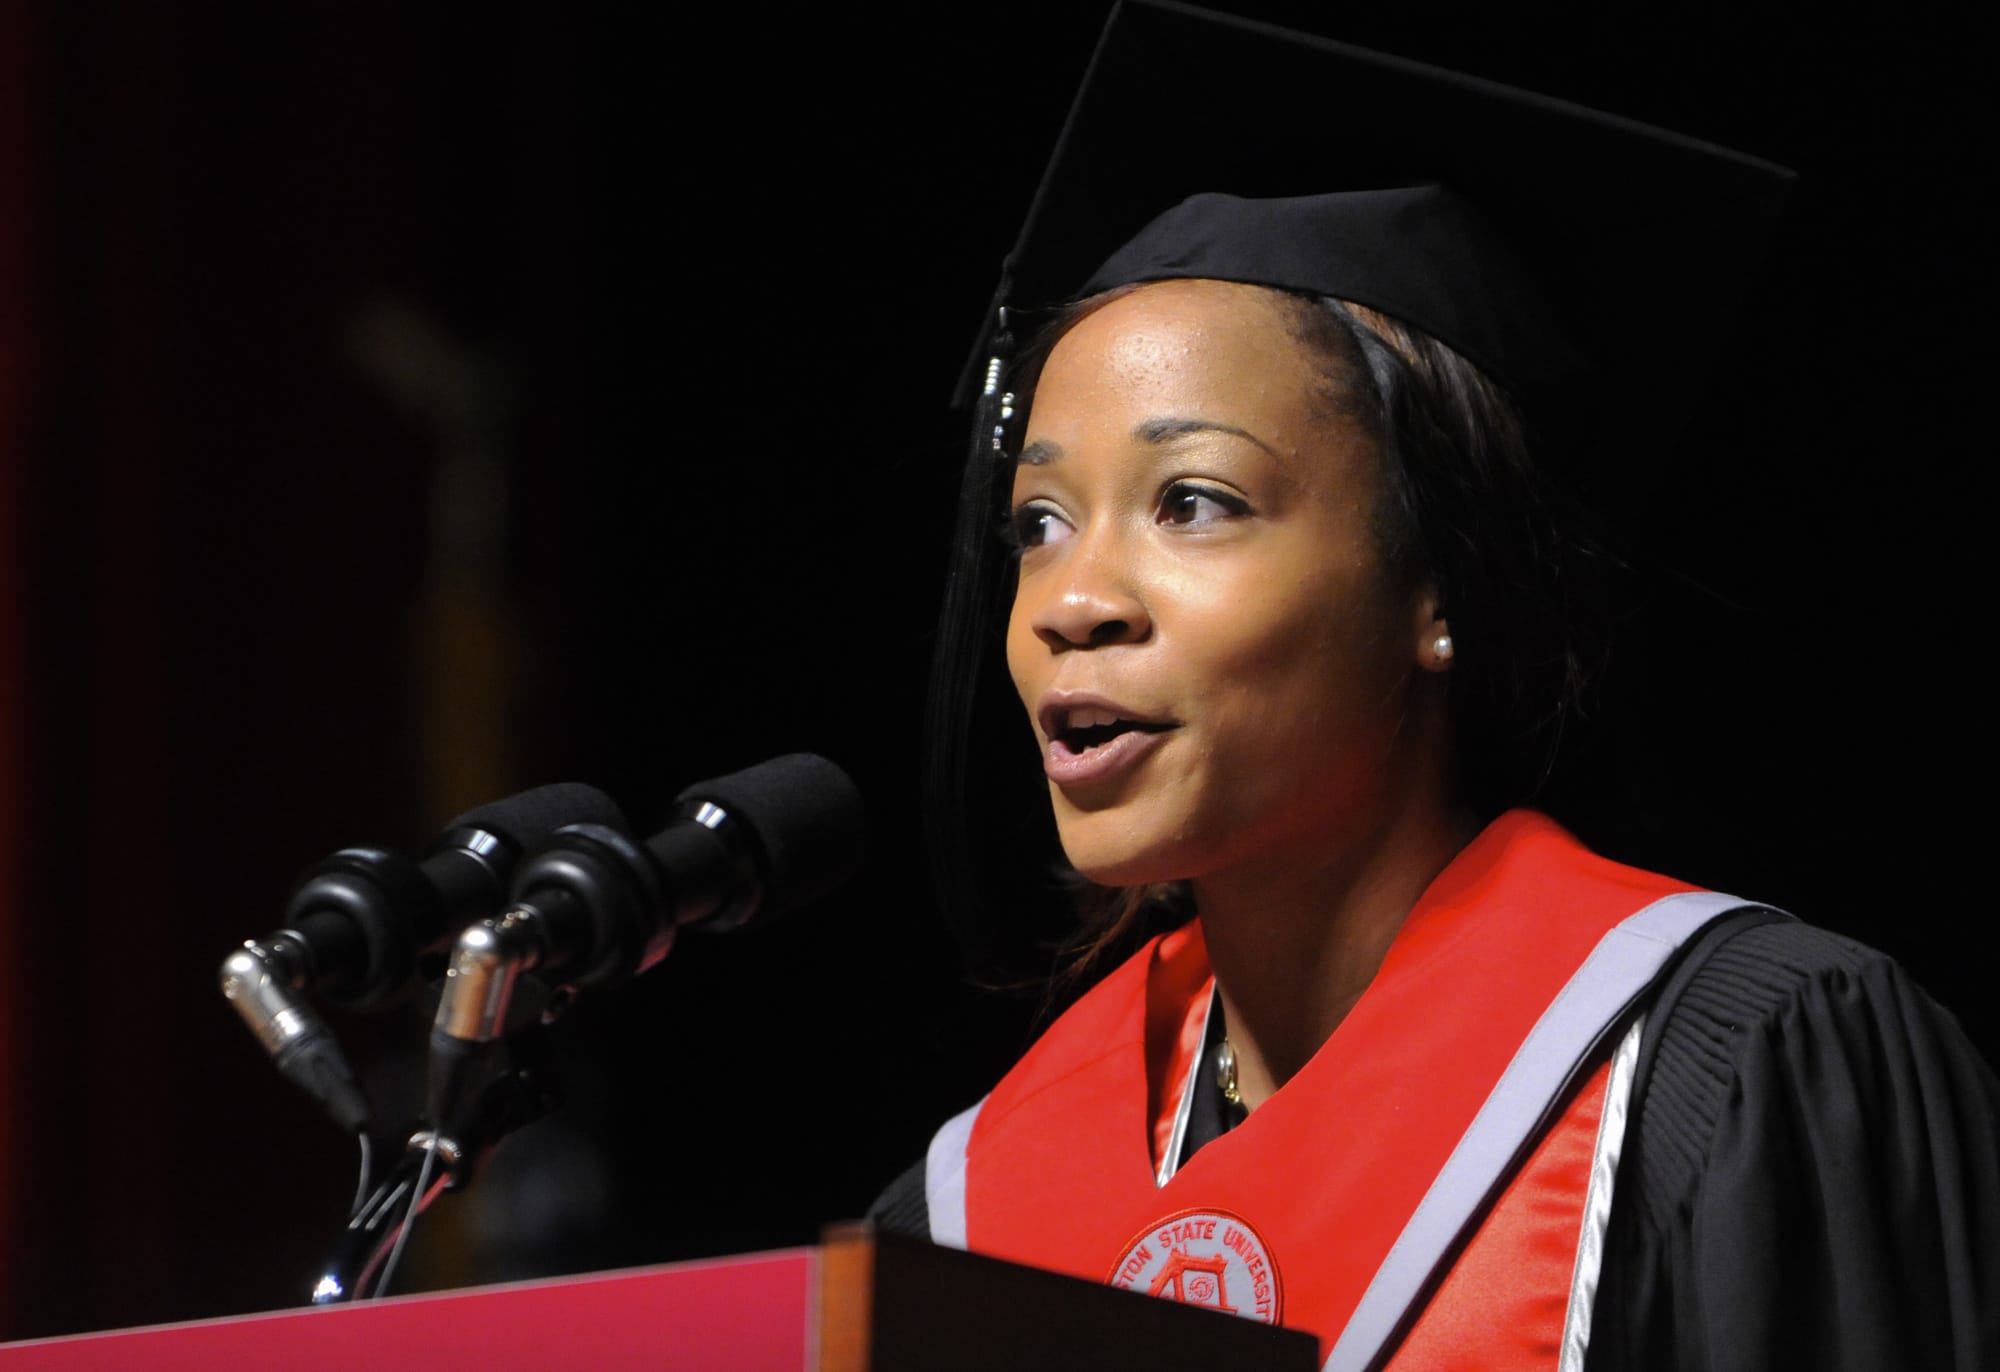 Shavenor Winters, president of Washington State University's Associated students for Vancouver speaks to 2014 graduates during their commencement ceremony in Ridgefield Wa., Saturday May 10, 2014.